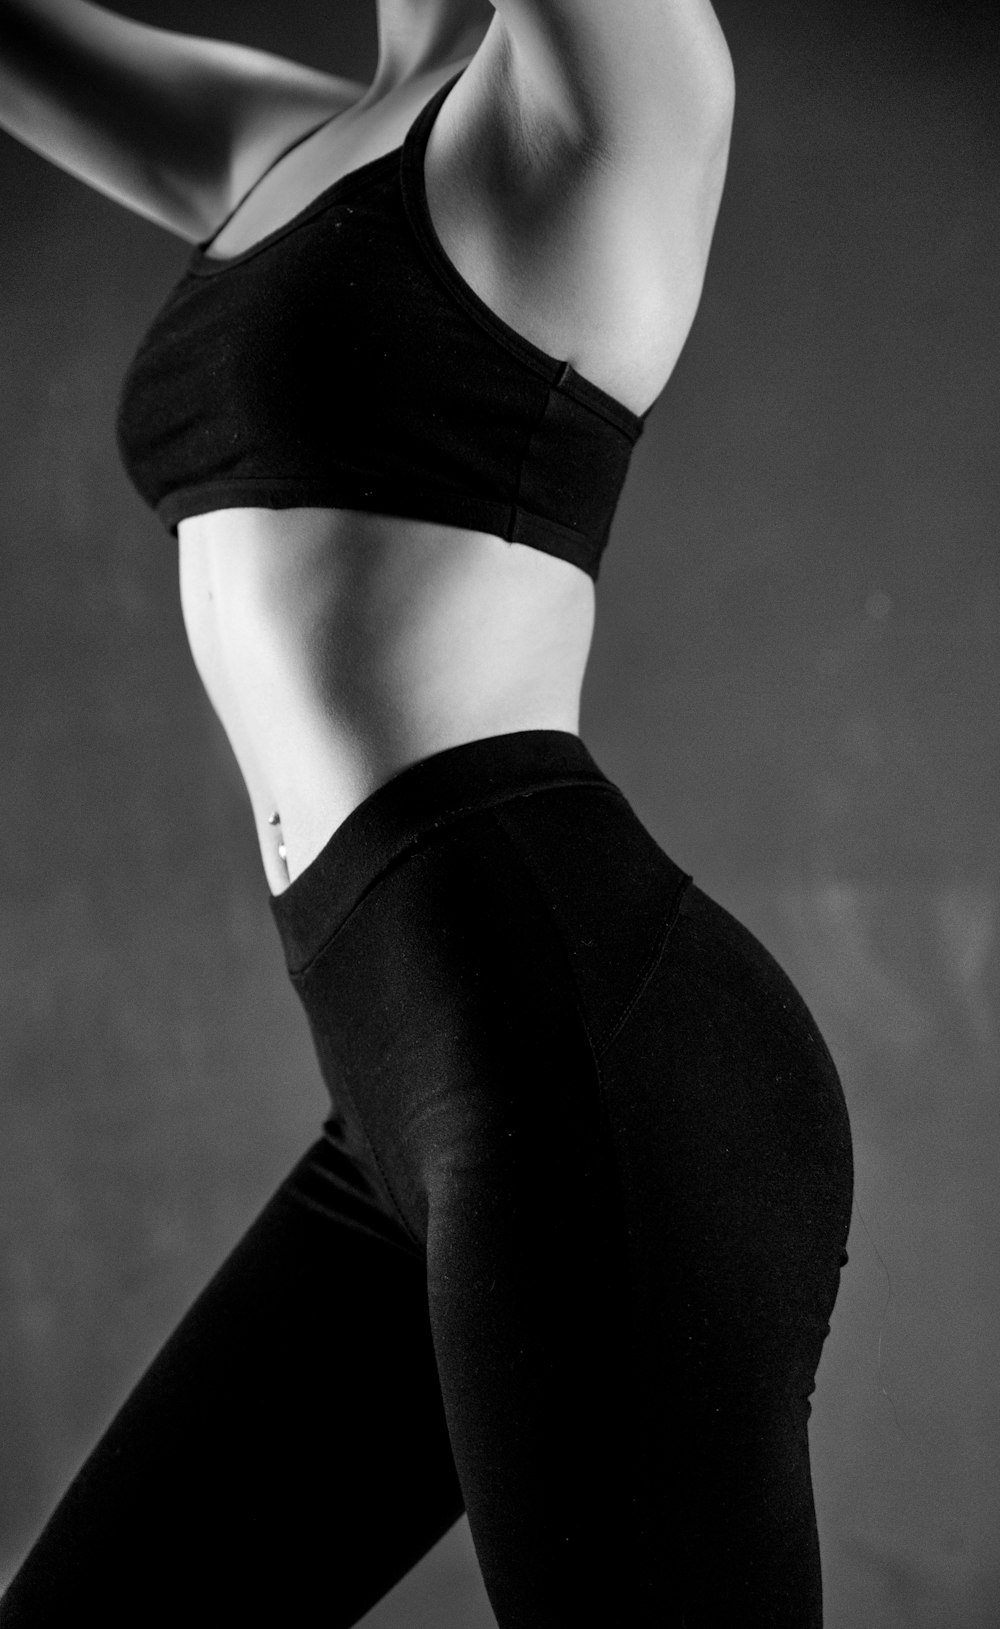 grayscale photo of person wearing sports bra and leggings